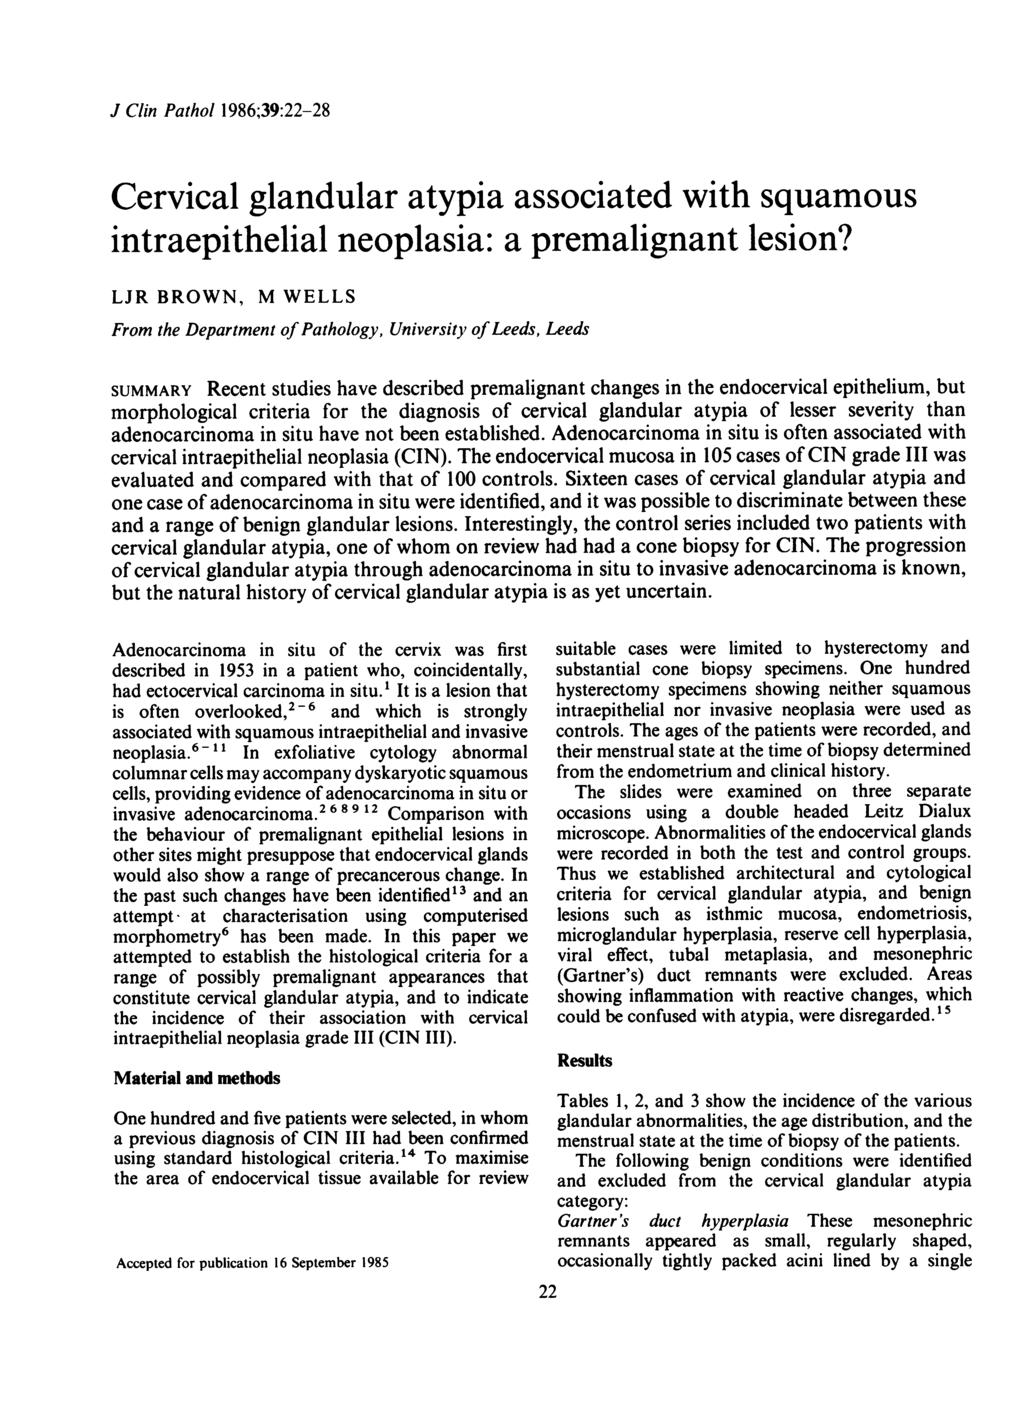 J Clin Pathol 1986;39:22-28 Cervical glandular atypia associated with squamous intraepithelial neoplasia: a premalignant lesion?